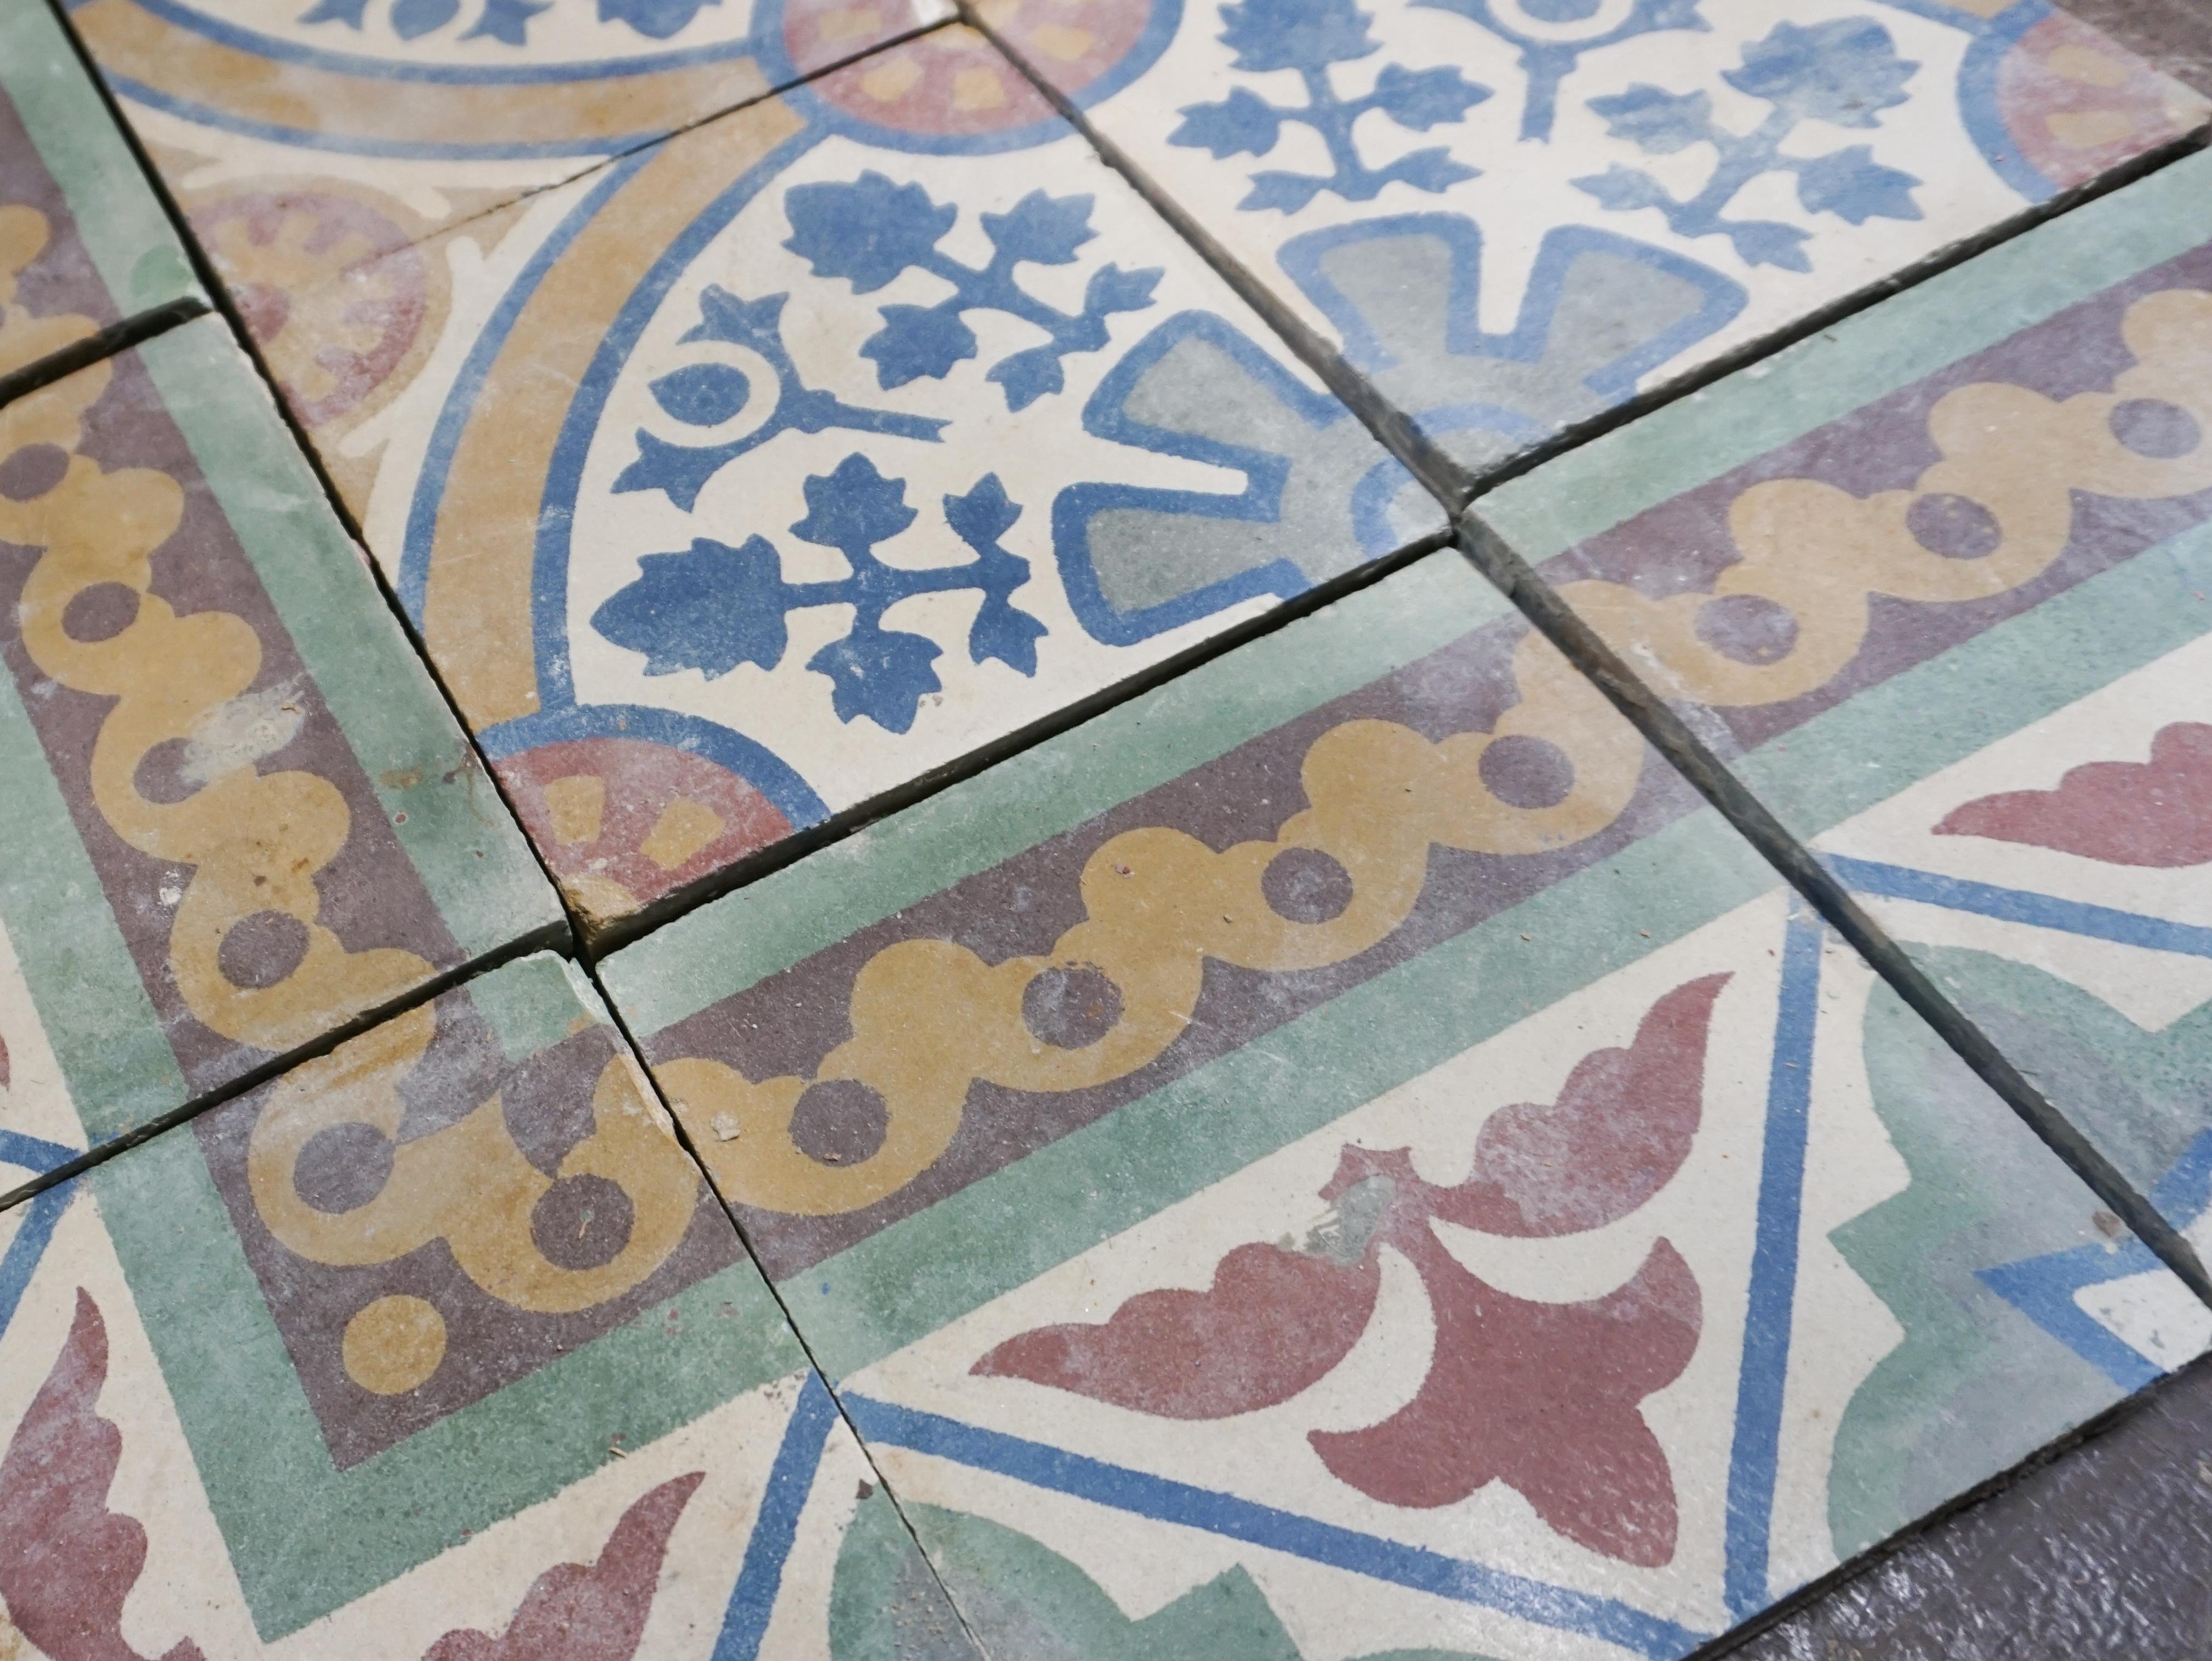 20th Century Reclaimed French Tiles, circa 1900